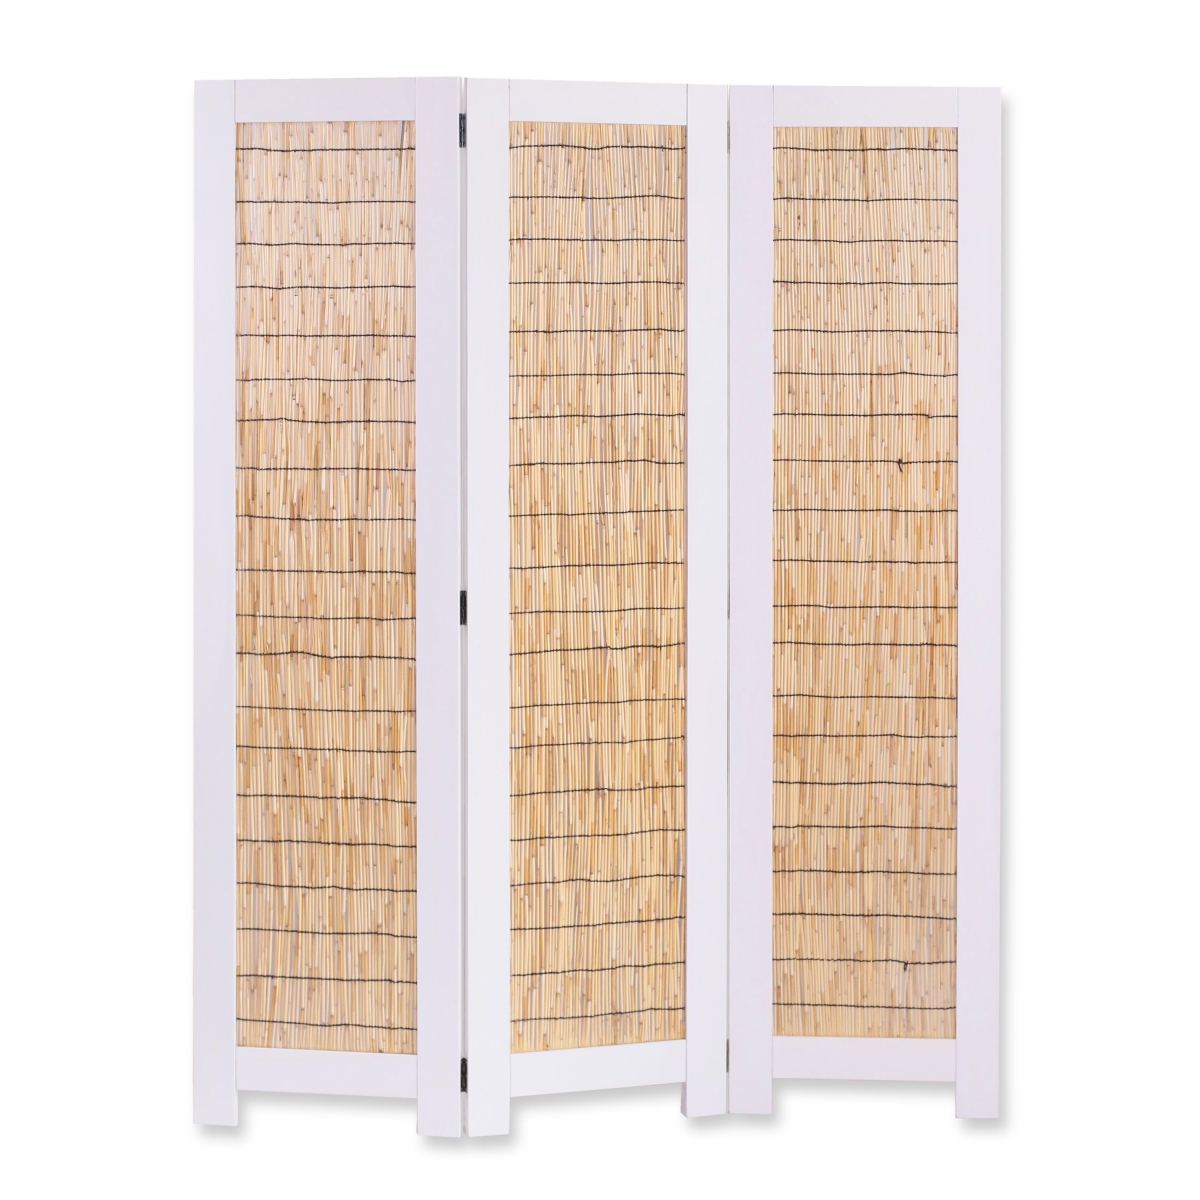 342754 47 X 1.5 X 67 In. White Wood Wicker Screen With 3 Panel